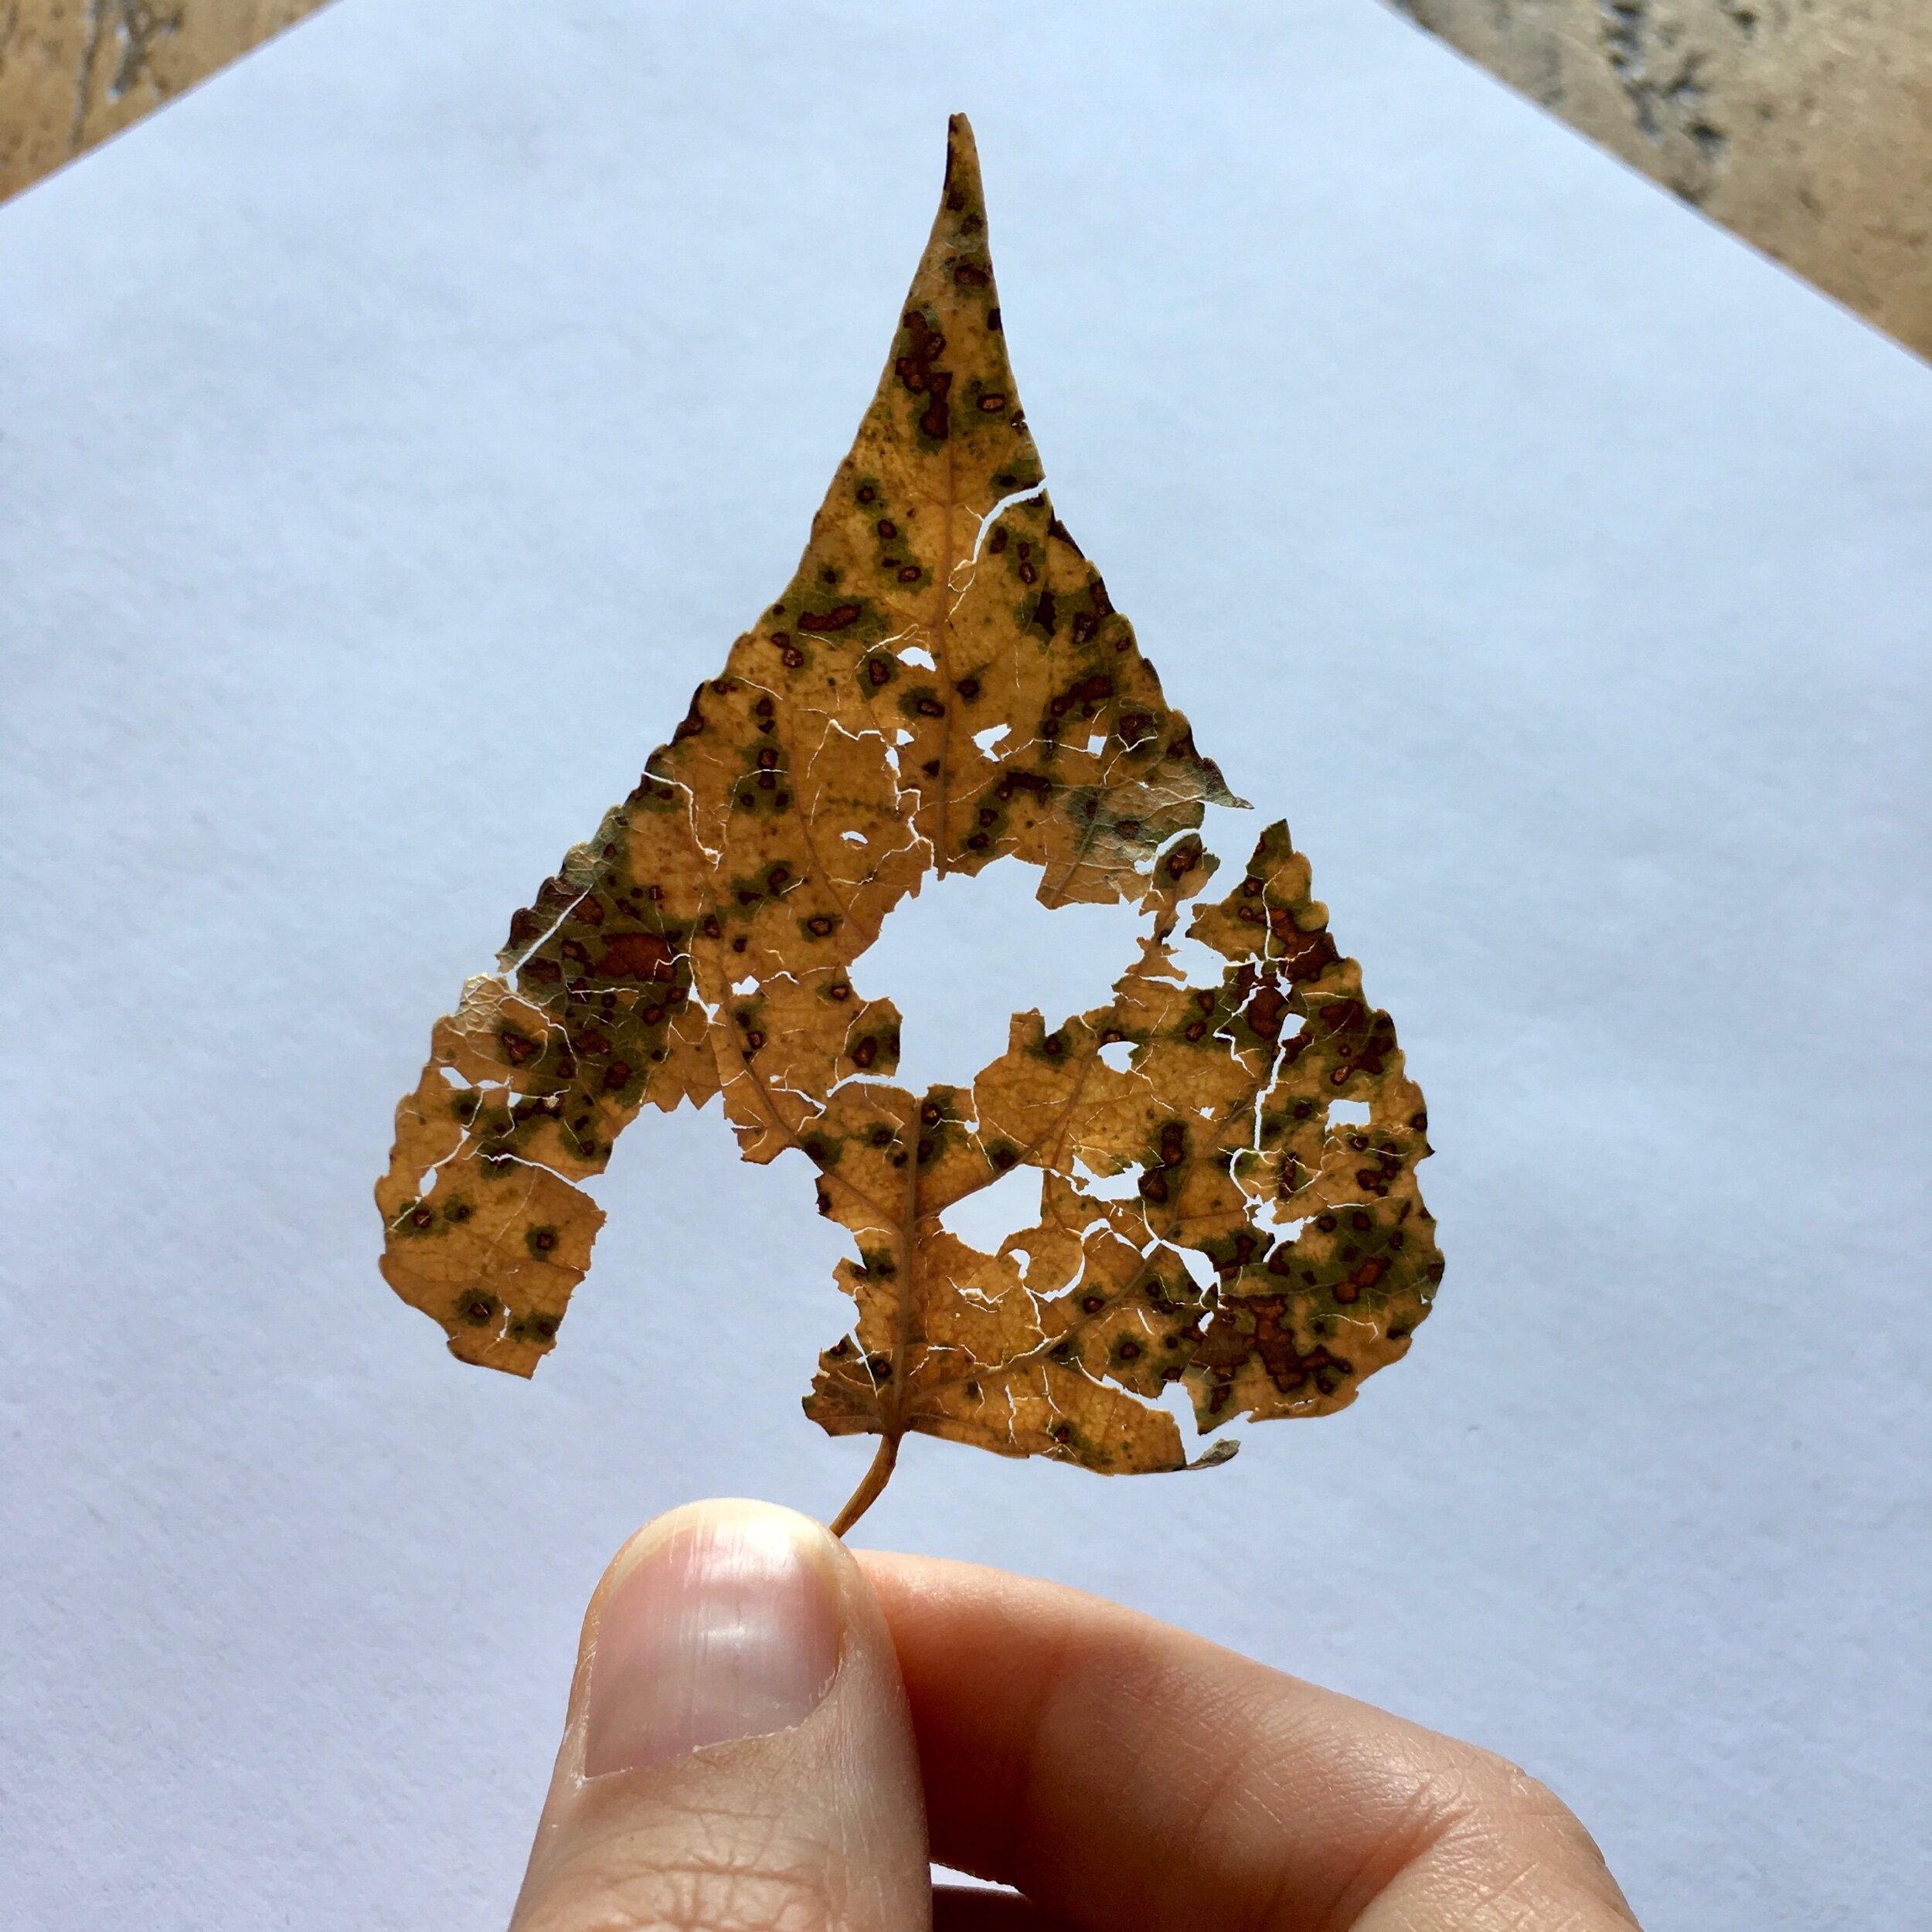 Decaying Leaf photo - Natural History observation for watercolour painting